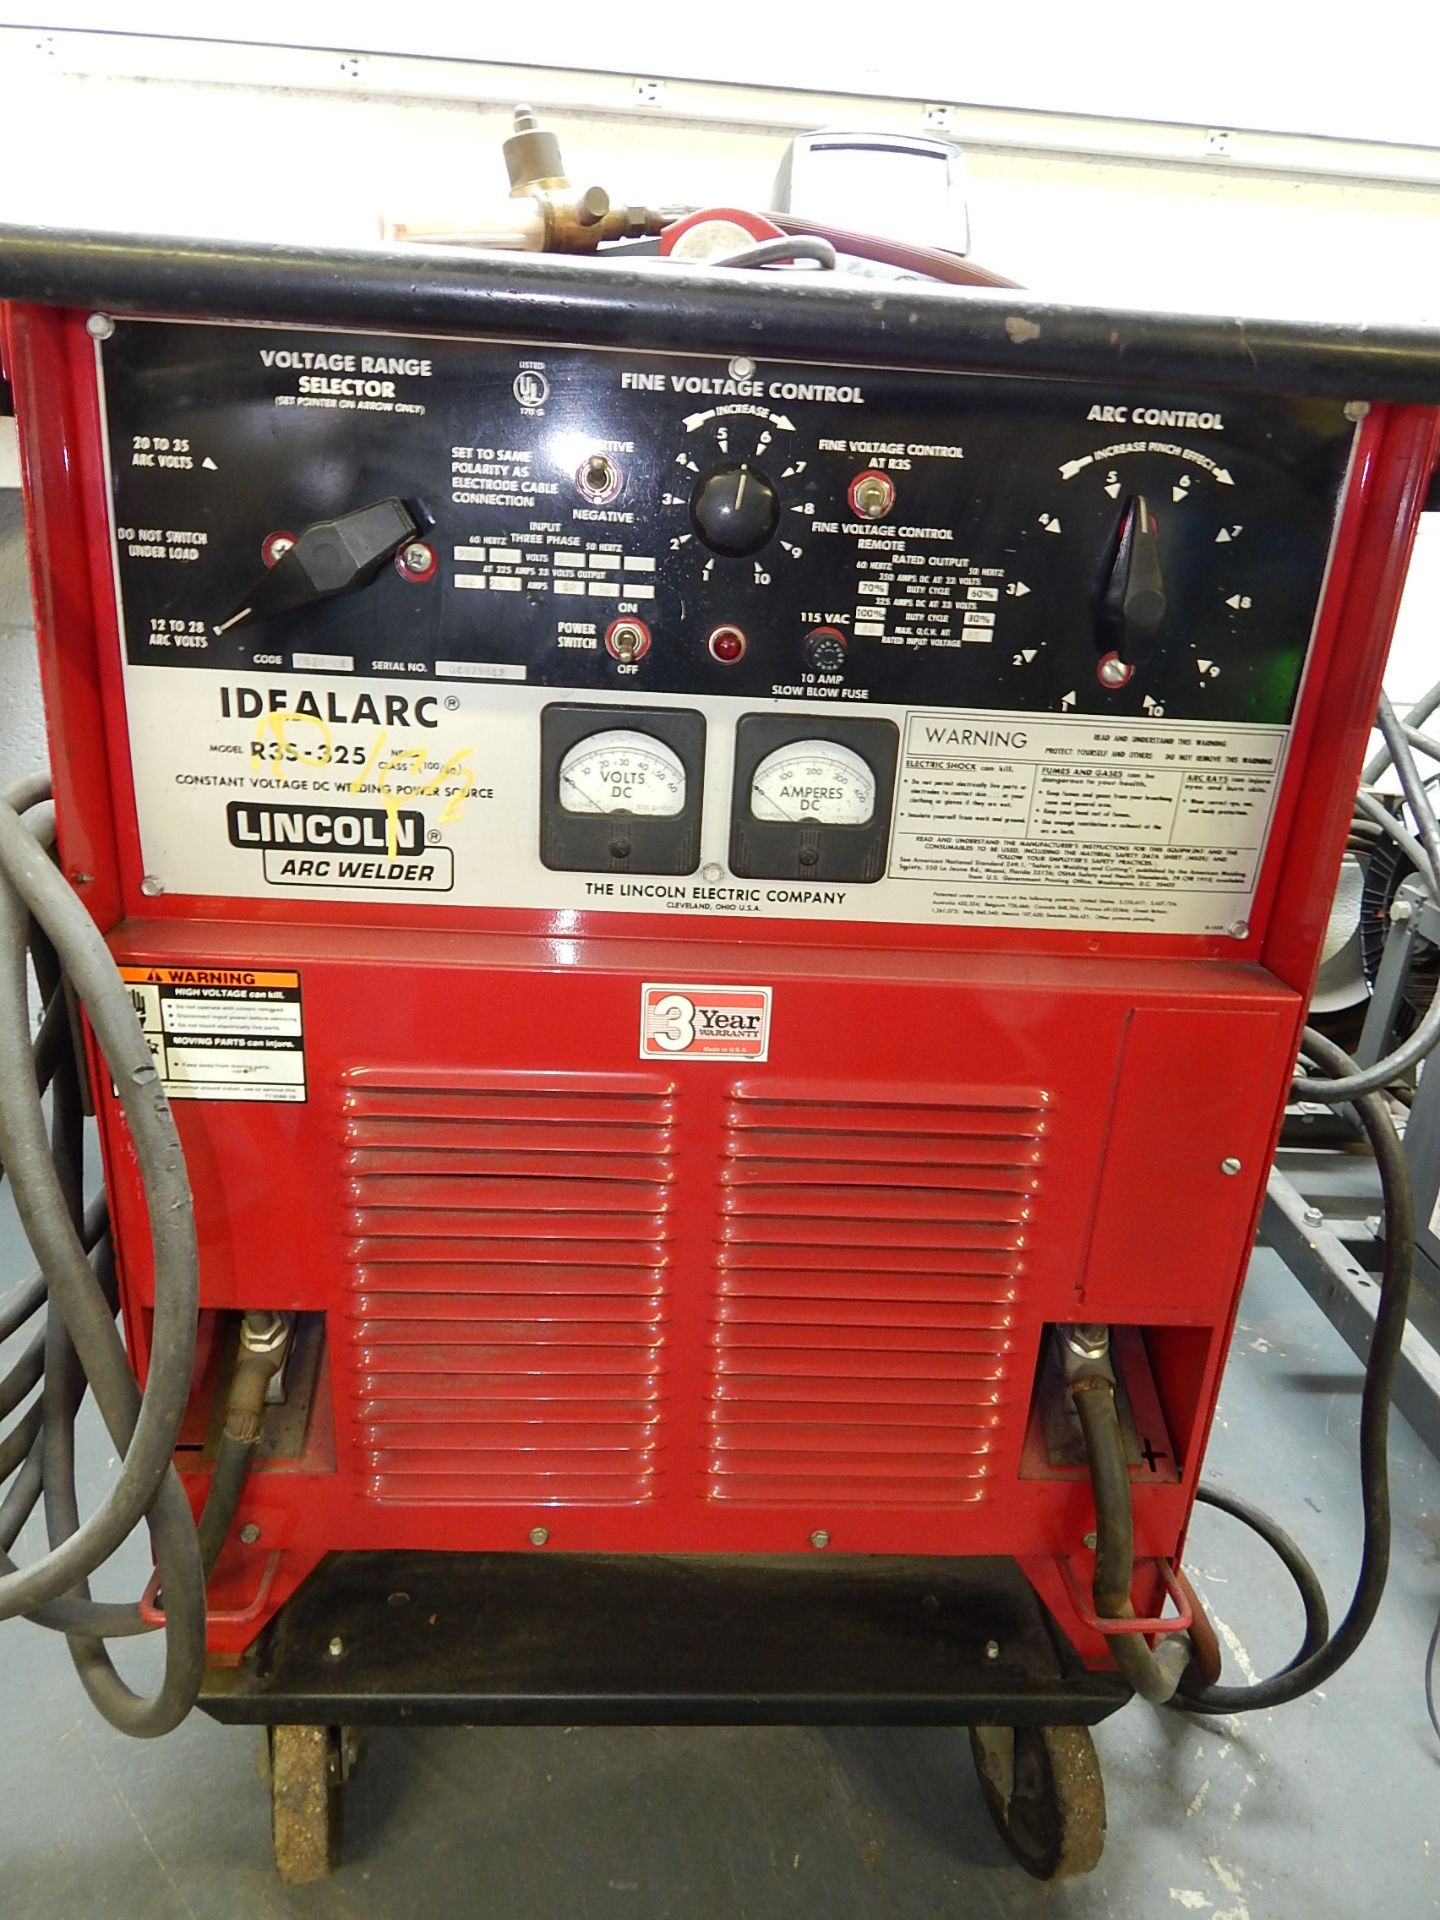 Lincoln Idealarc R3S-325 Mig Welder, s/n AC679812, with Lincoln LN-7 Wire Feeder and Mig Gun - Image 2 of 5